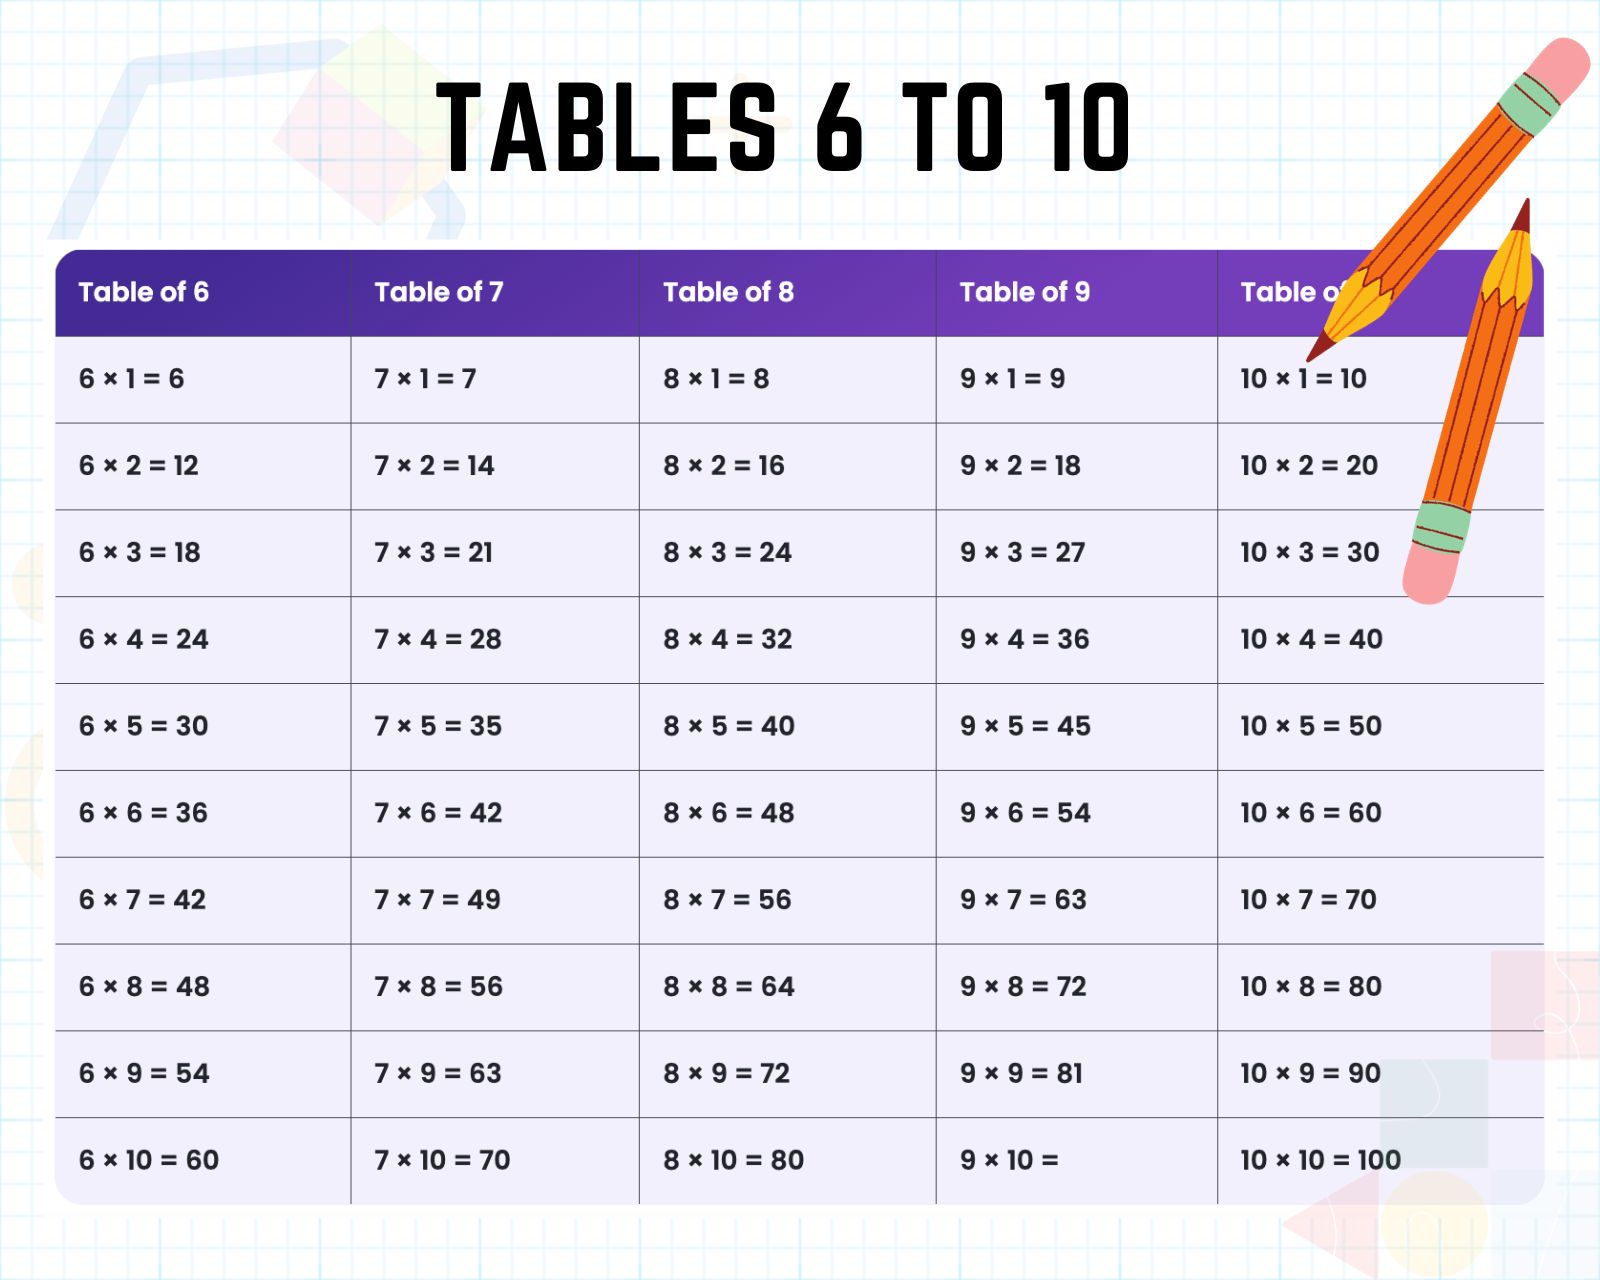 tables 6 to 10 HD image